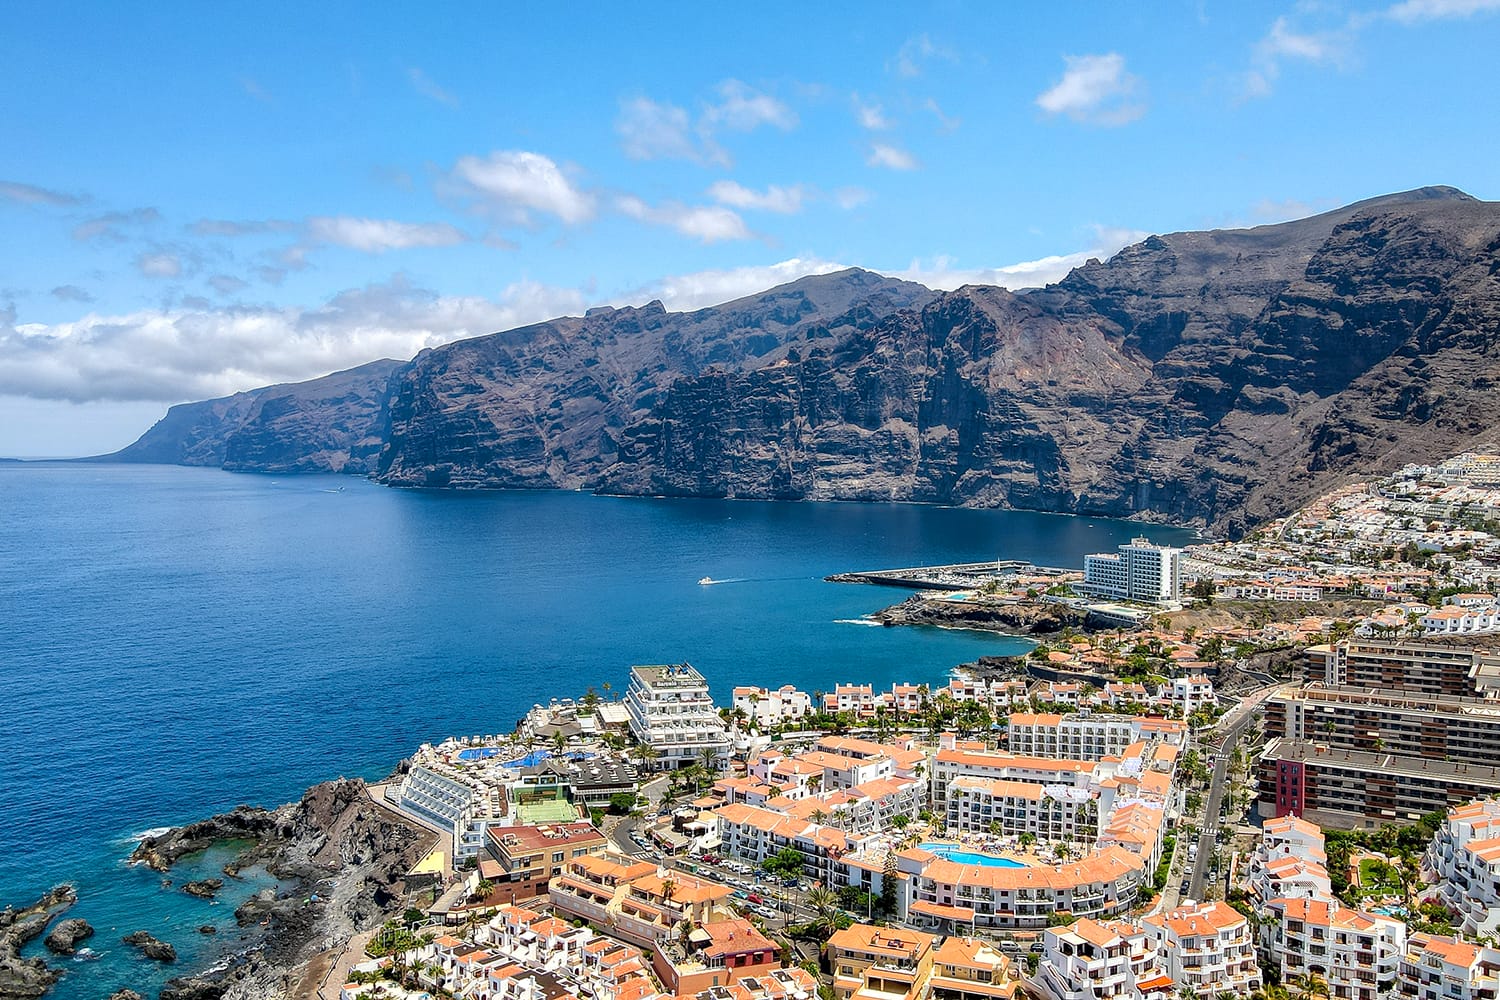 Aerial photos of the coast and tourist area of Puerto Santiago and Los Gigantes, Tenerife, Canary Islands